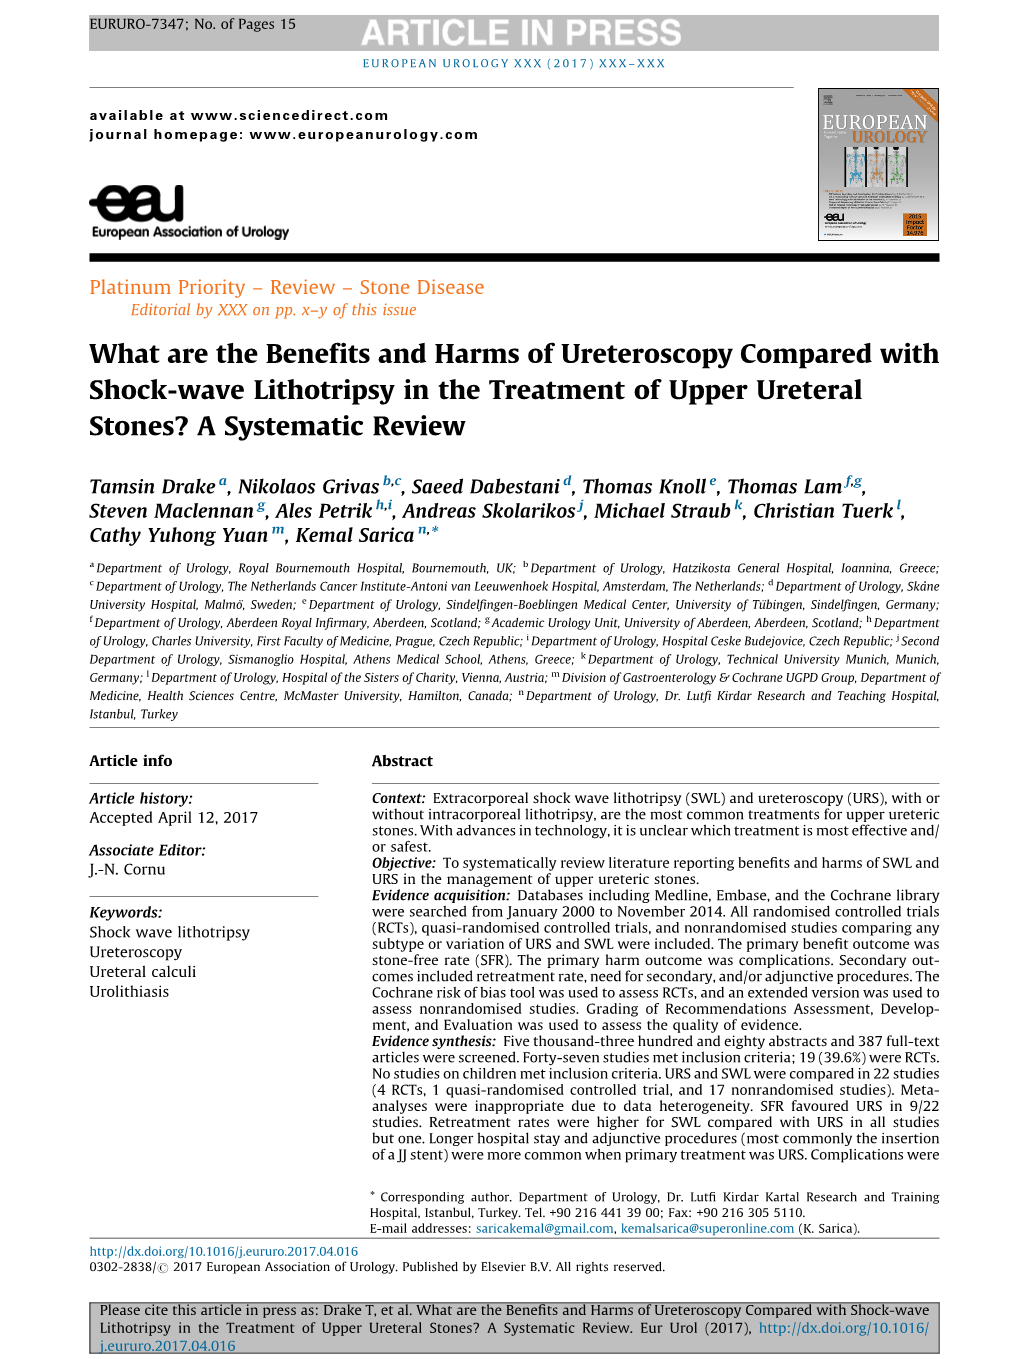 What Are the Benefits and Harms of Ureteroscopy Compared With